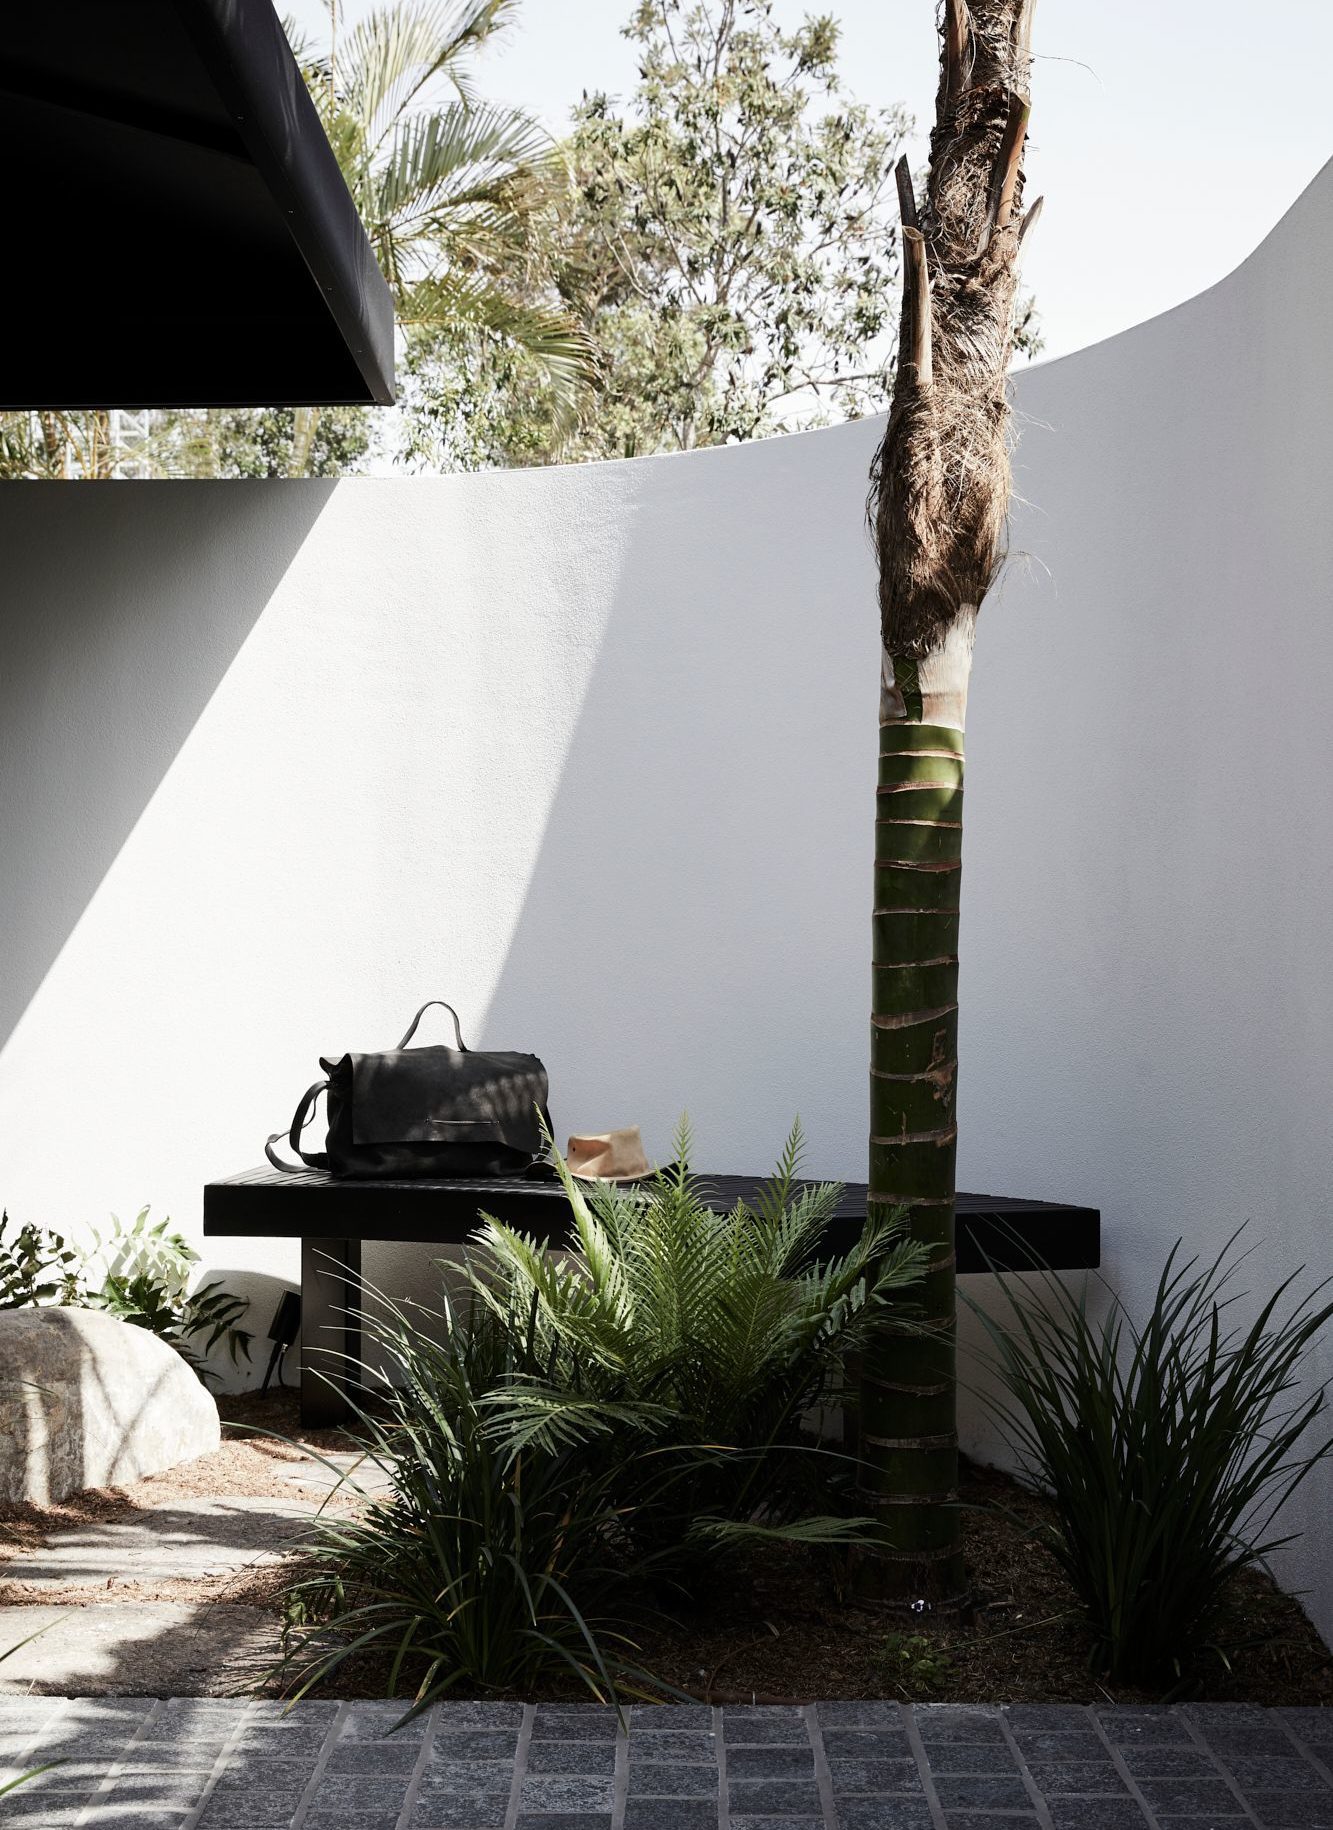 Courtyard with sun streaming through palm trees at The Bower Studio